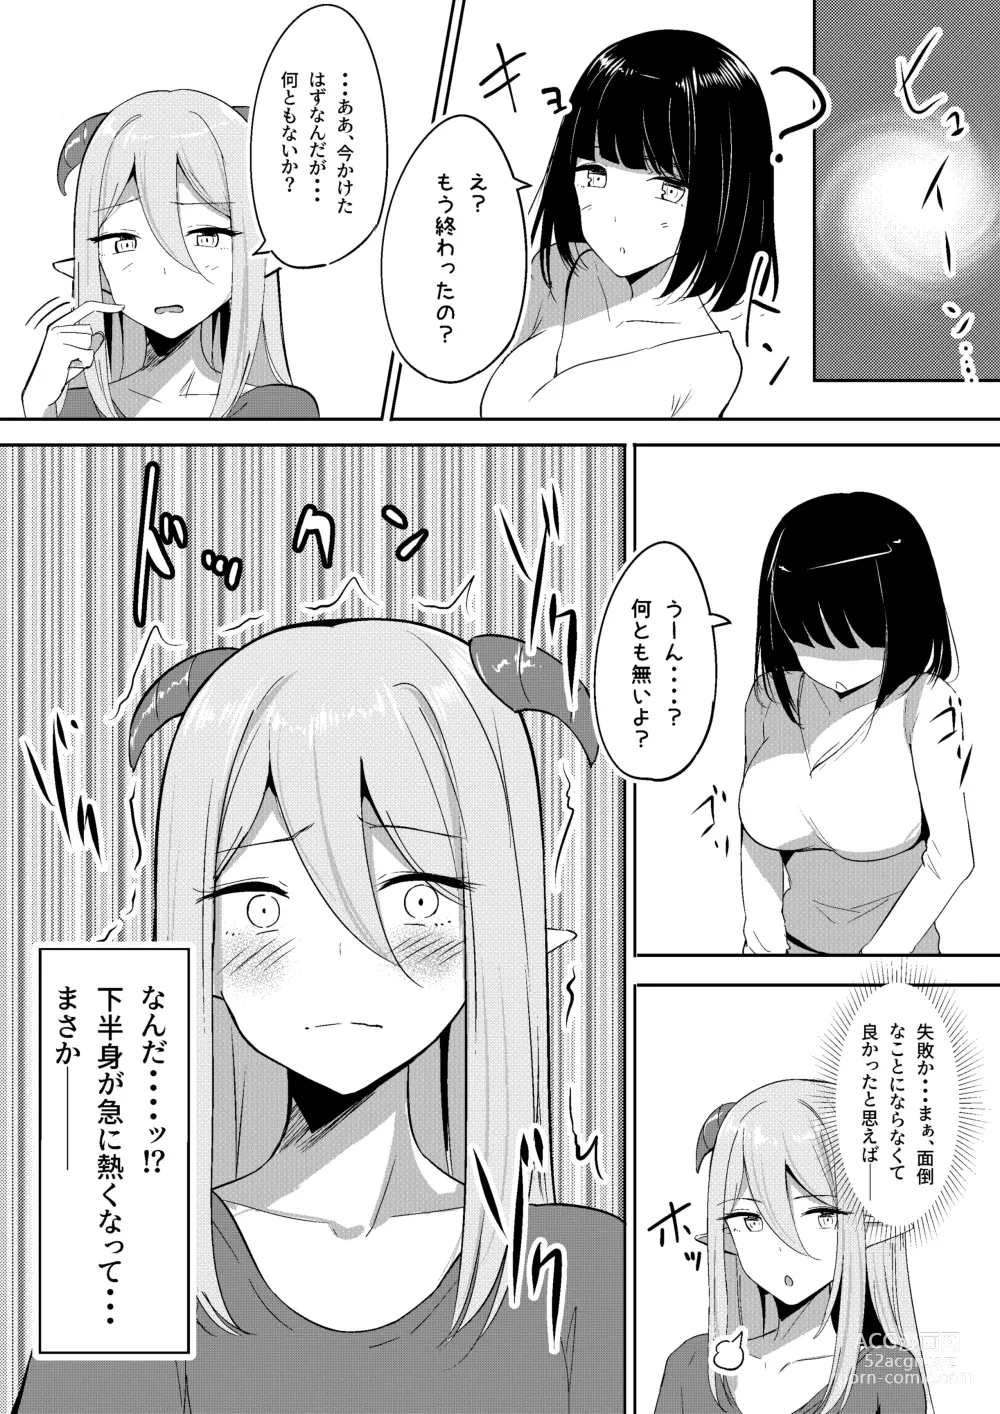 Page 7 of doujinshi Succubus Lily 2